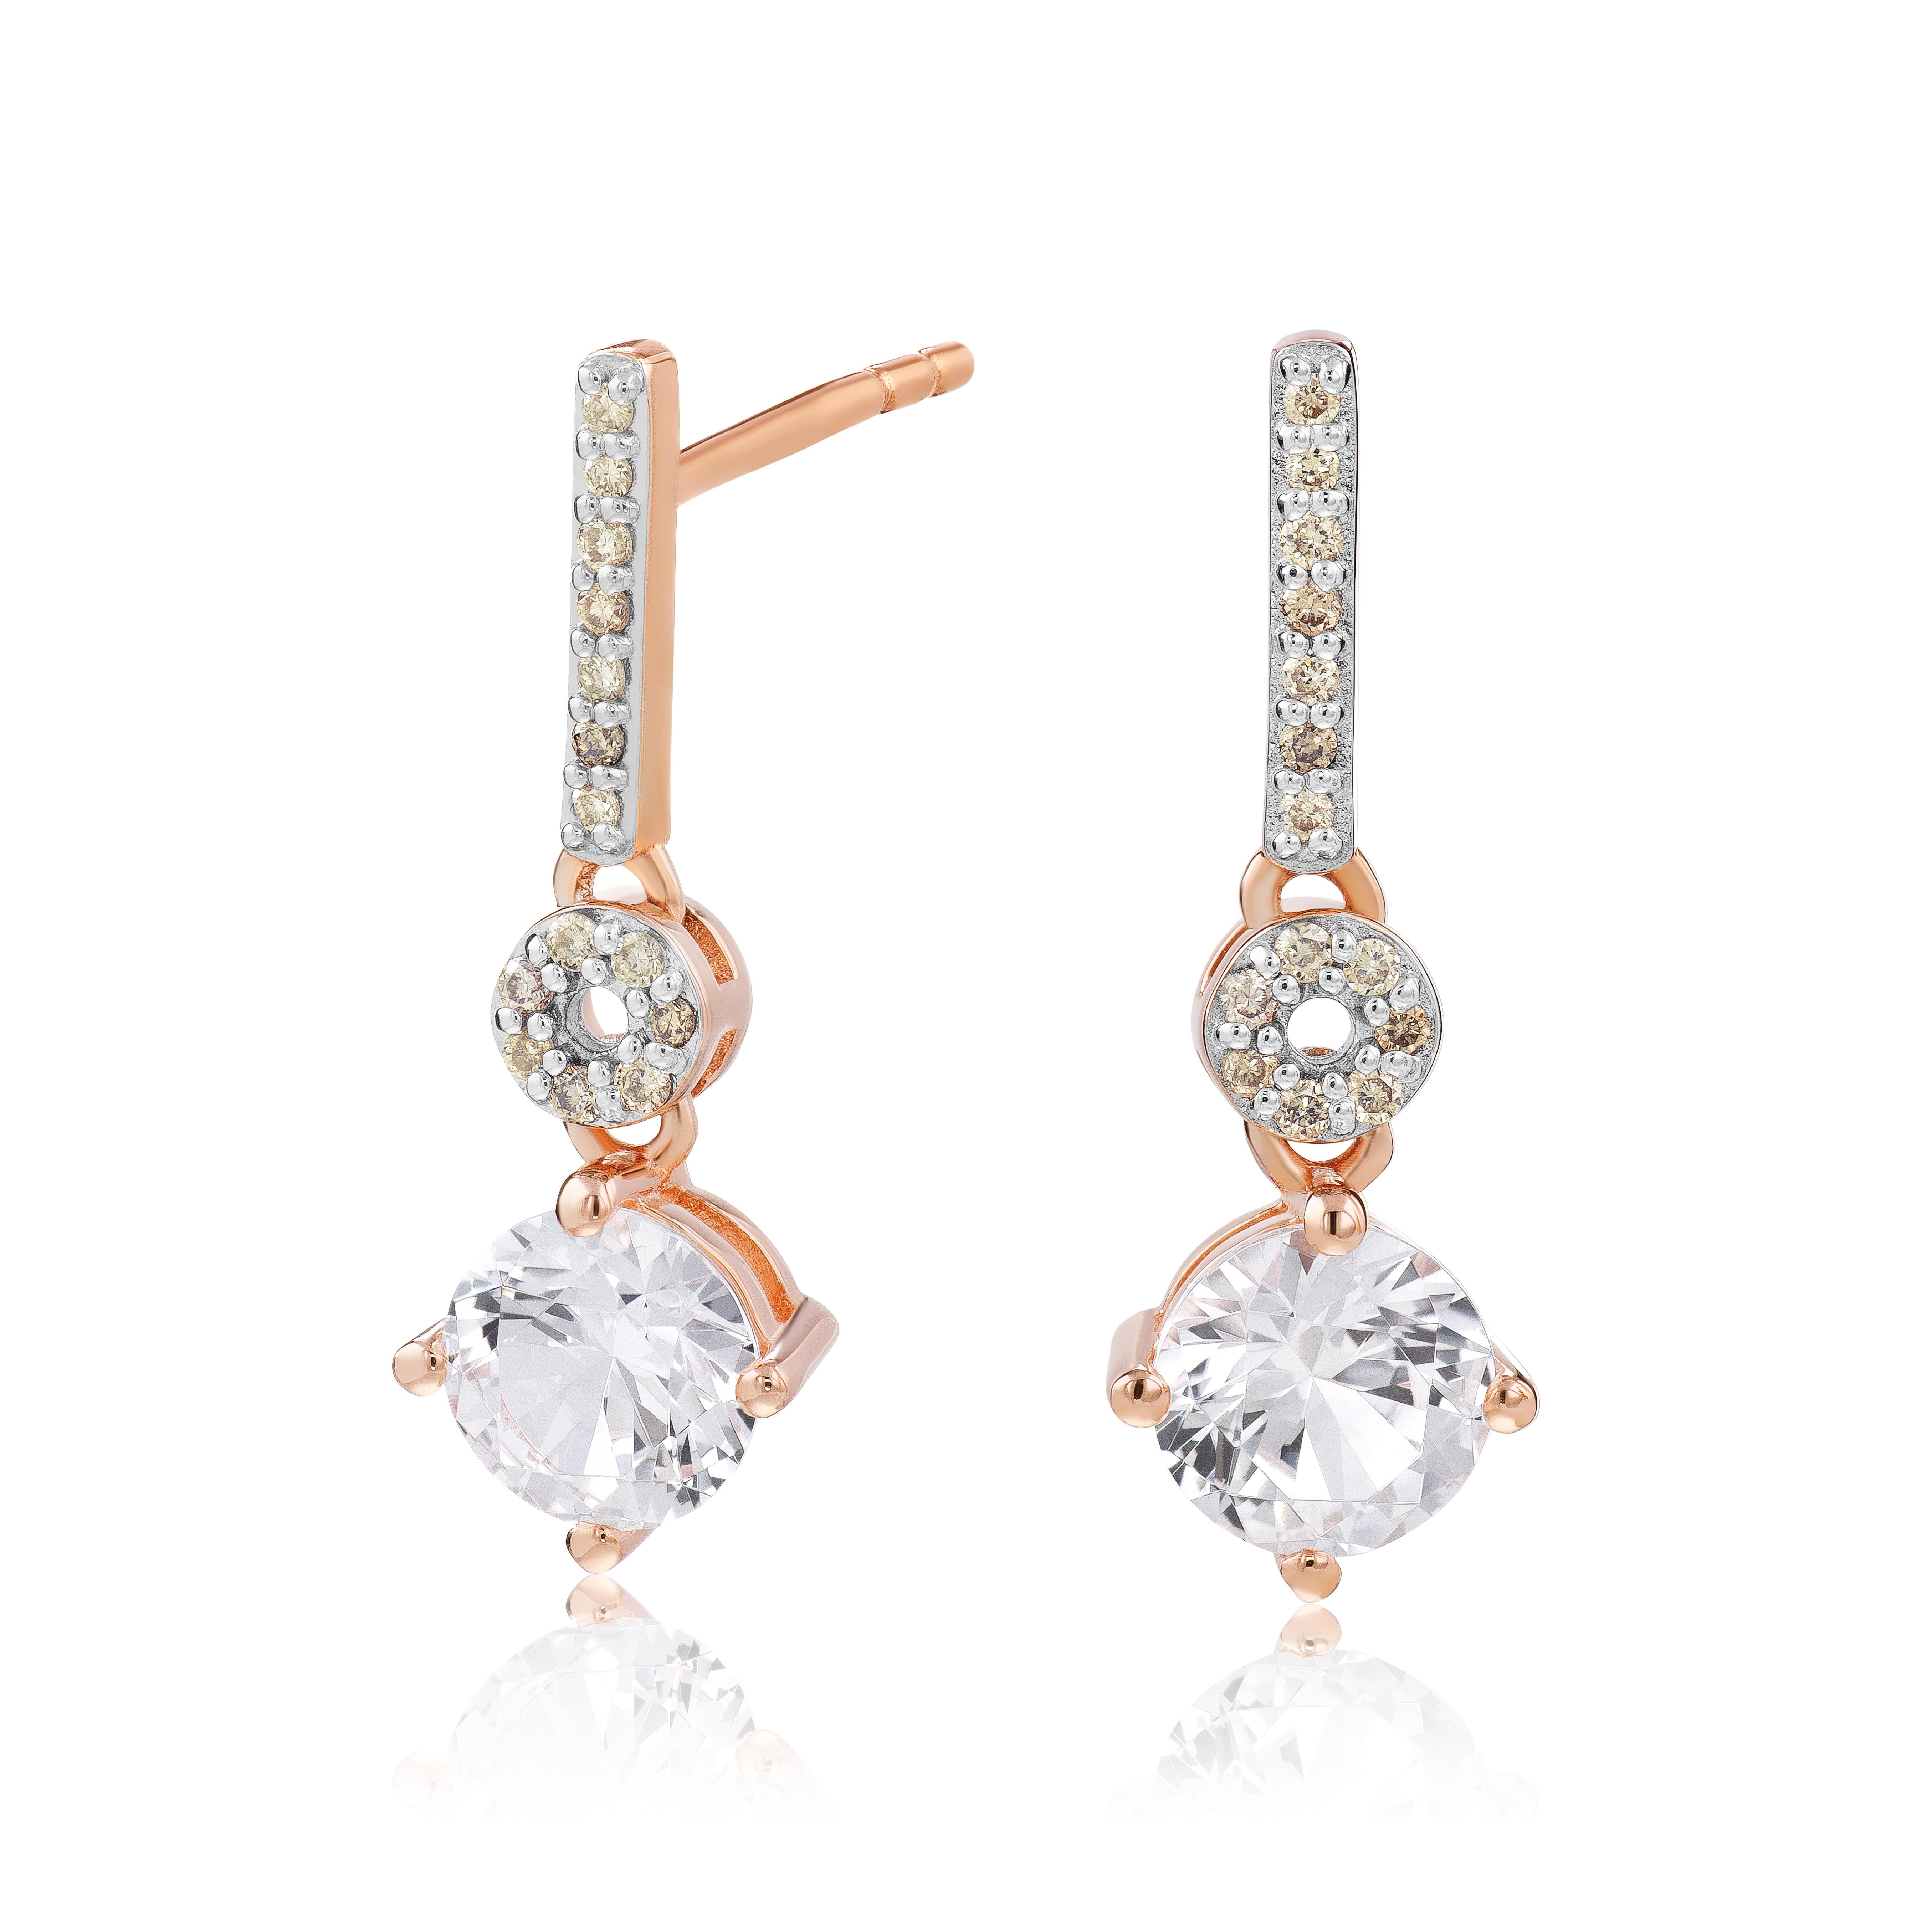 Enhance your style with the sophisticated elegance of these sterling silver earrings. The 28 natural brown diamonds, totaling .10 carats, create a mesmerizing and unique look that will surely captivate attention. The warm and earthy tones of the